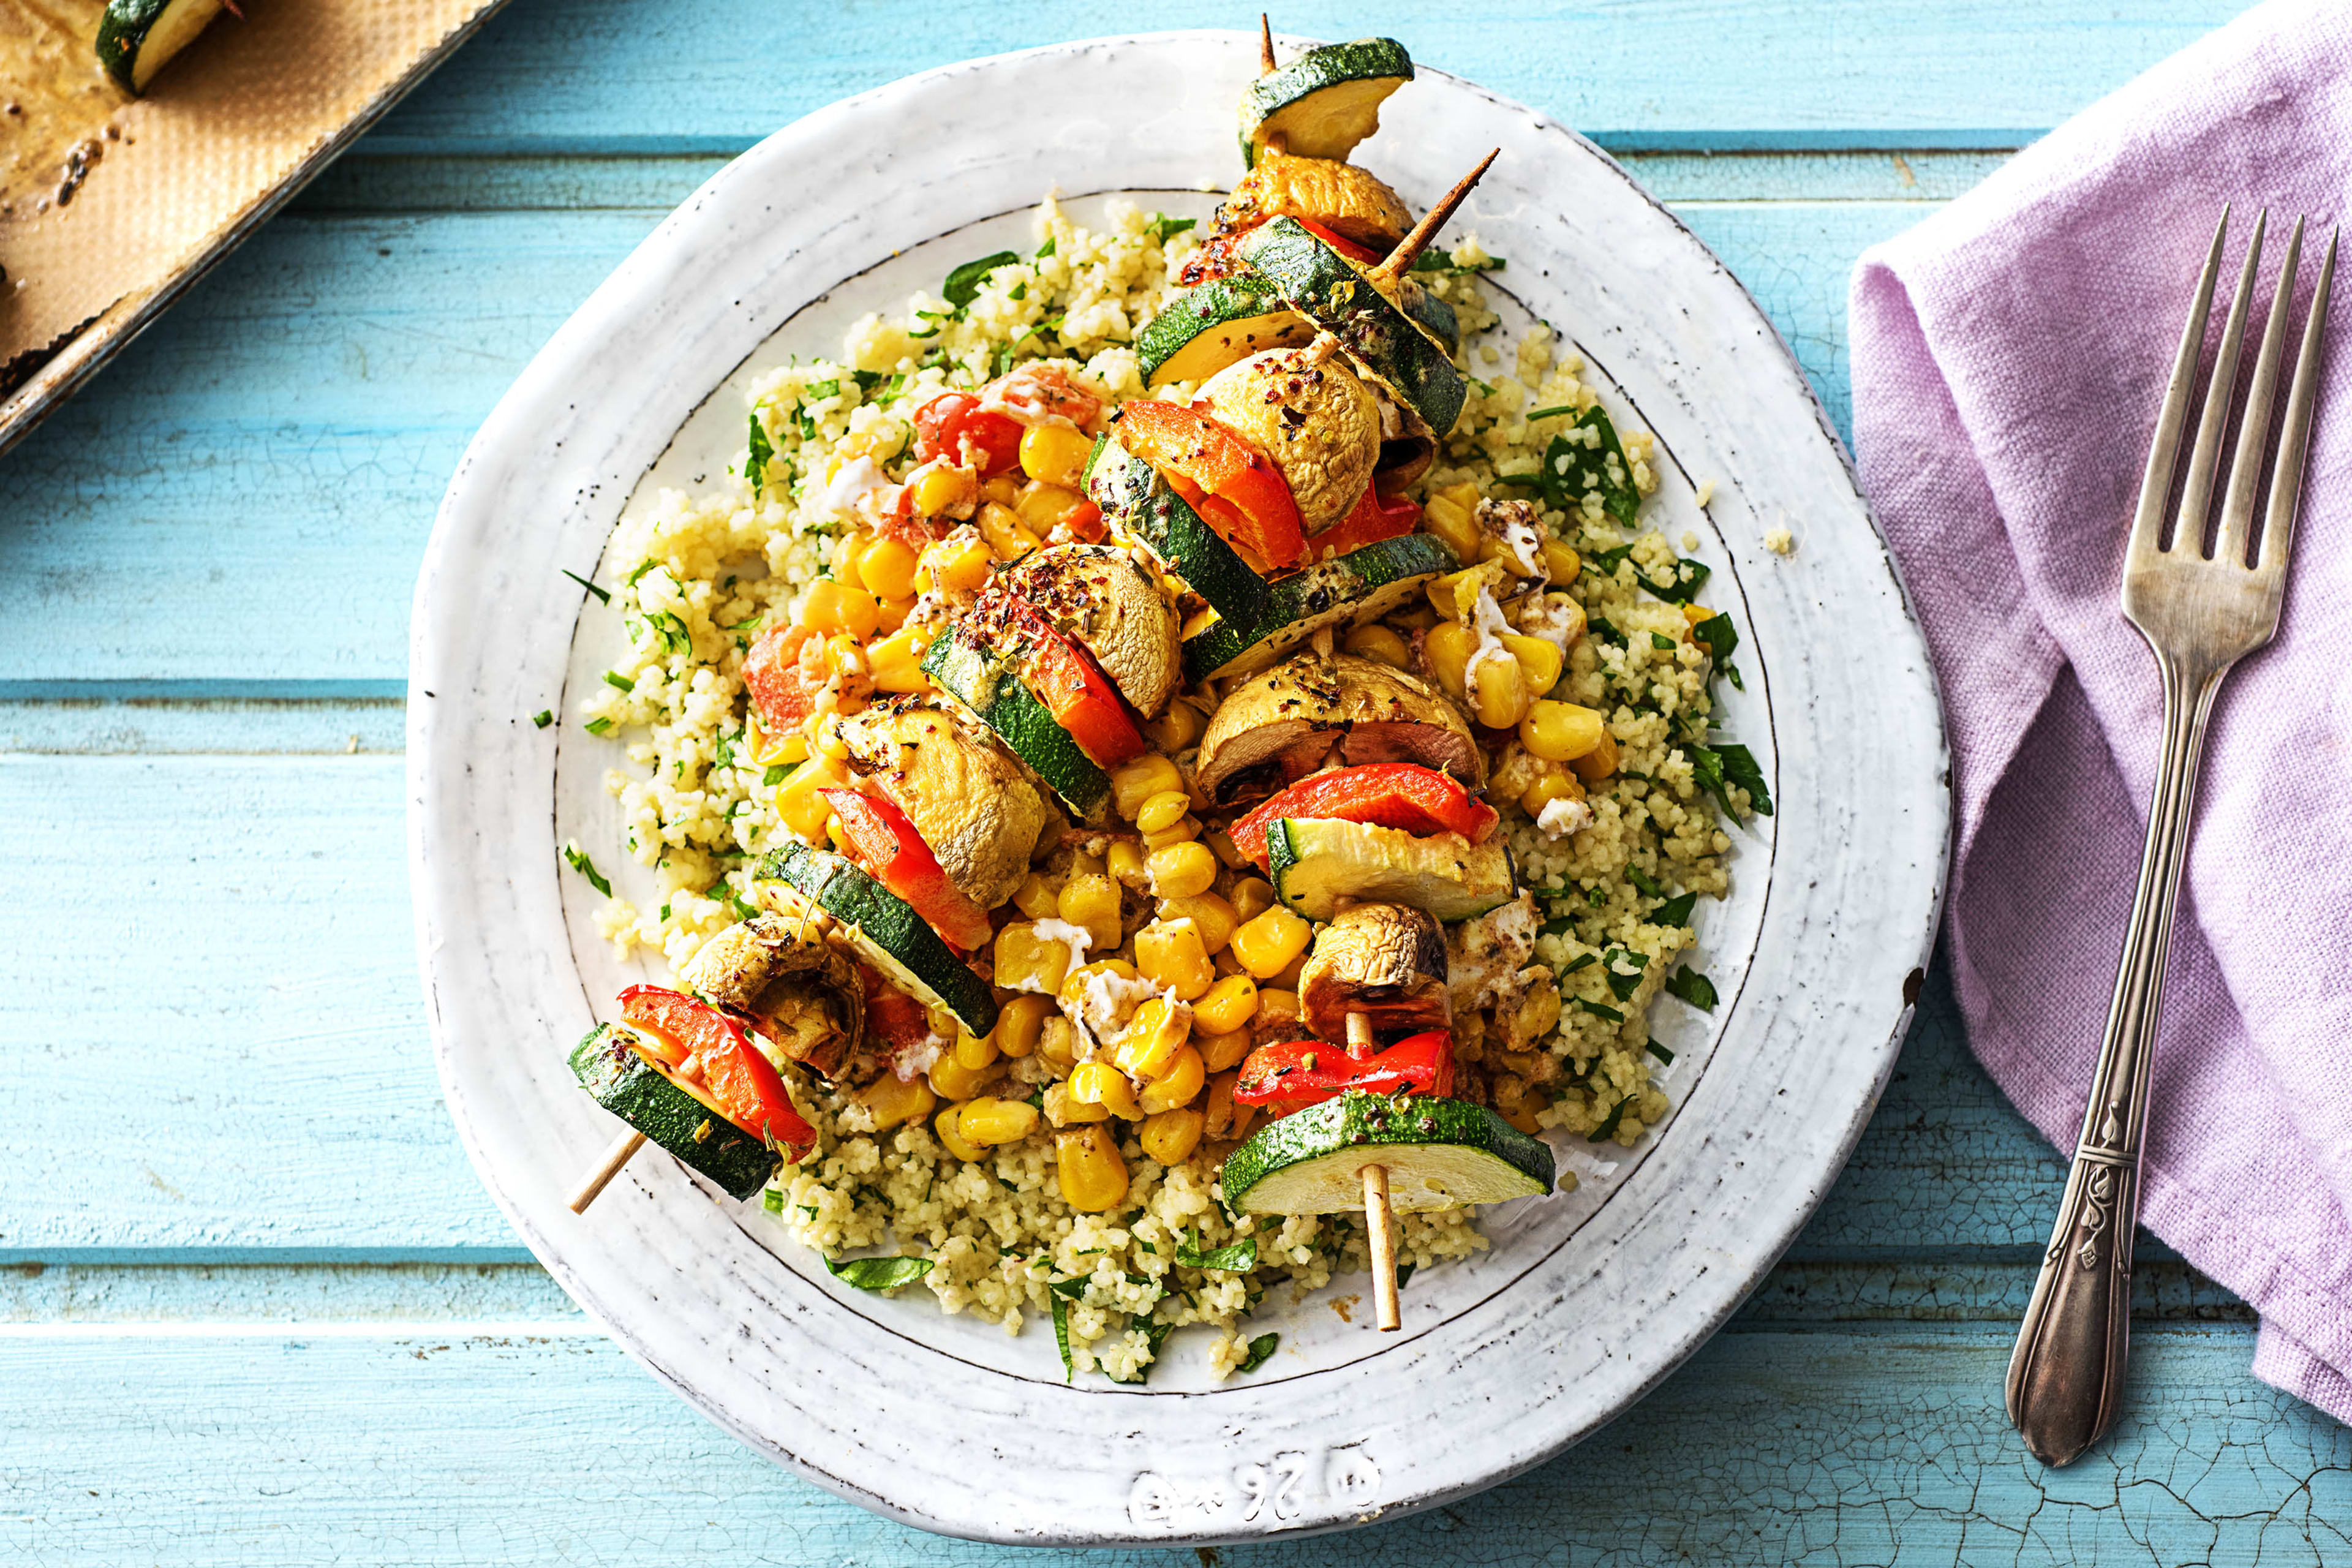 Pork and Scallion Kebabs with Herbed Couscous